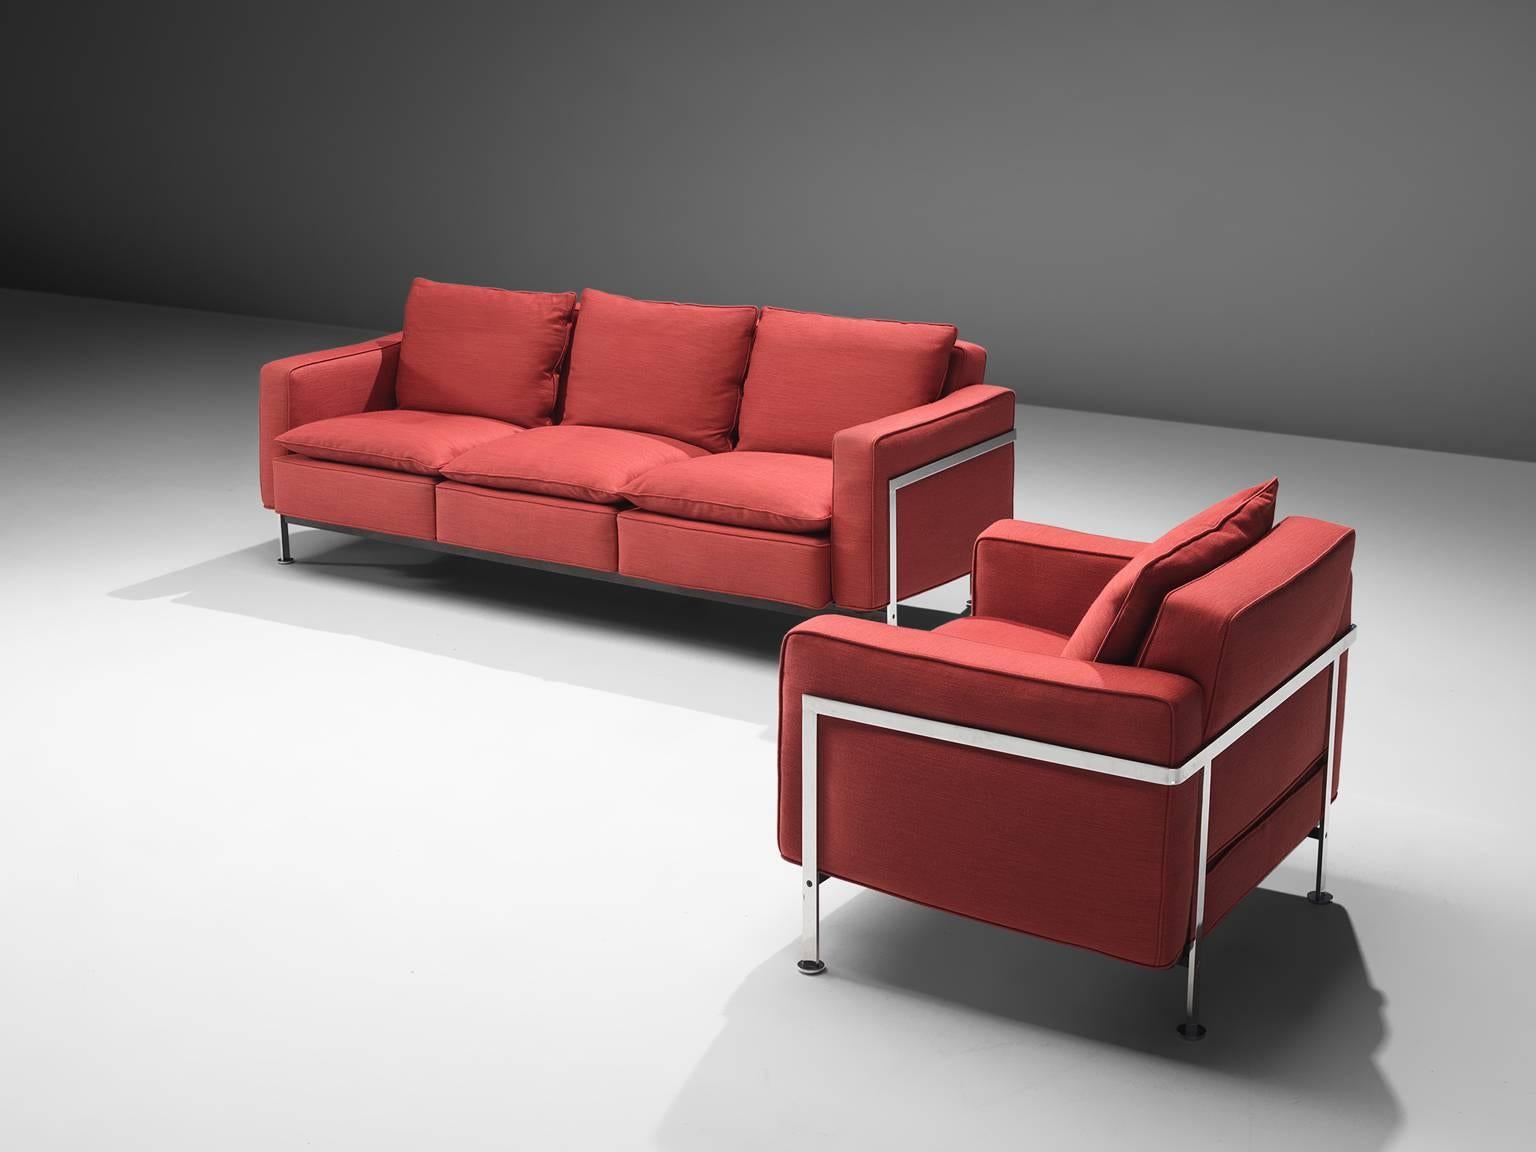 Robert Hausmann for De Sede, sofa and armchair in red fabric, steel, Switzerland, 1954.

This comfortable sofa and matching chair are designed with a chromed iron frame that functions as a basket for the cushions on the inside. The thick back and